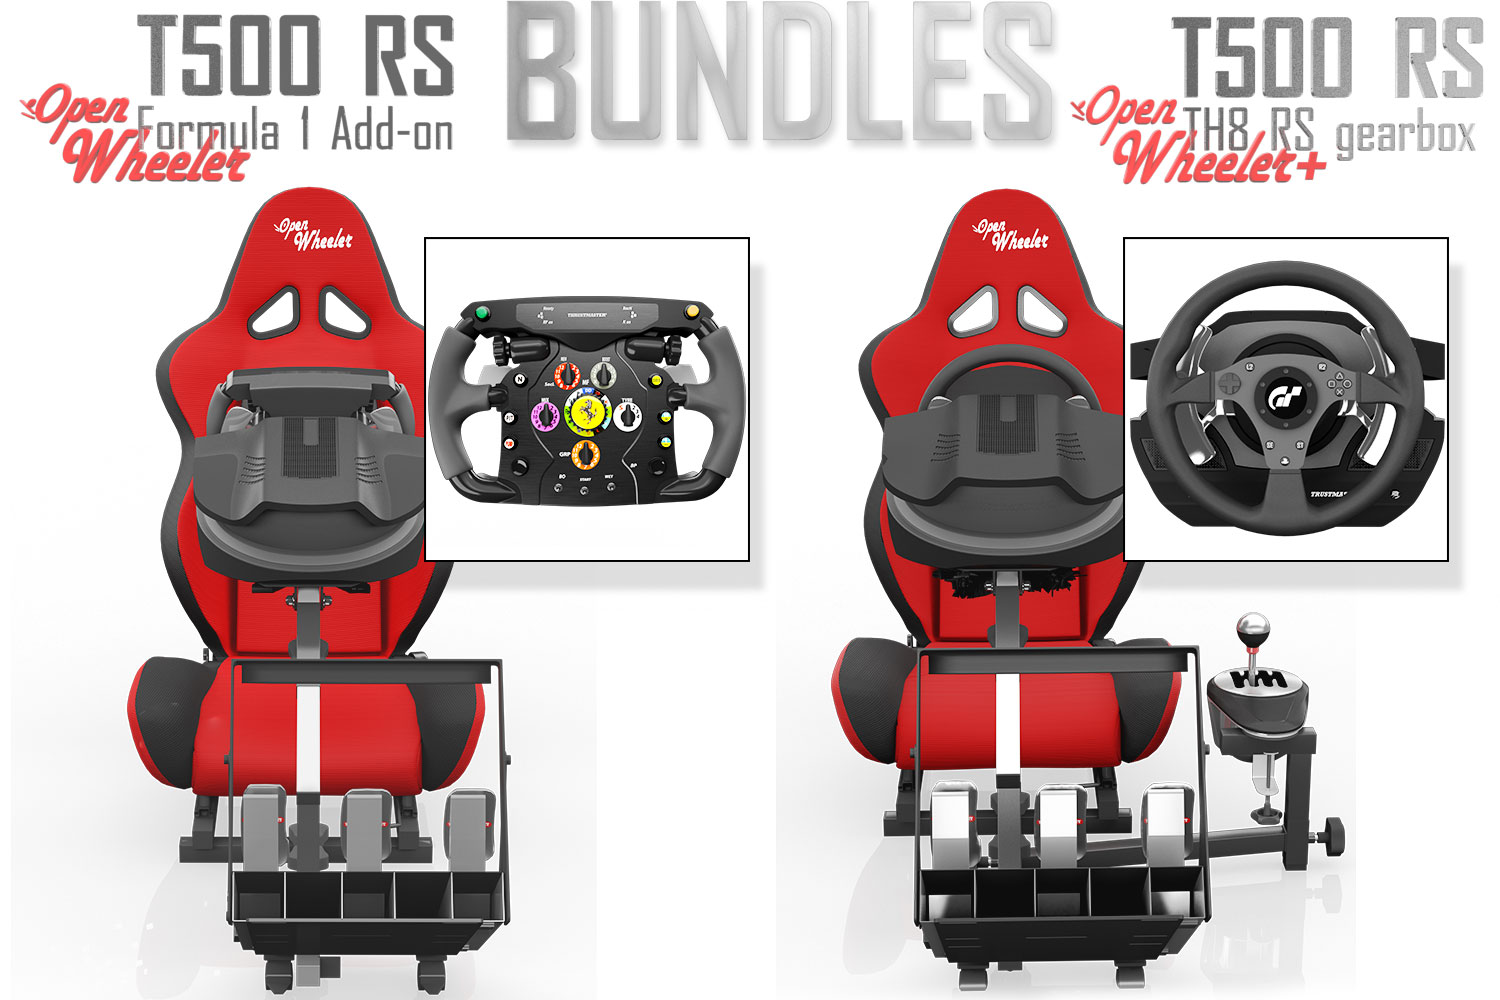 The T500 RS/TH8 RS/OpenWheeler+ and T500 RS/Ferrari F1/OpenWheeler - A Special Bundles